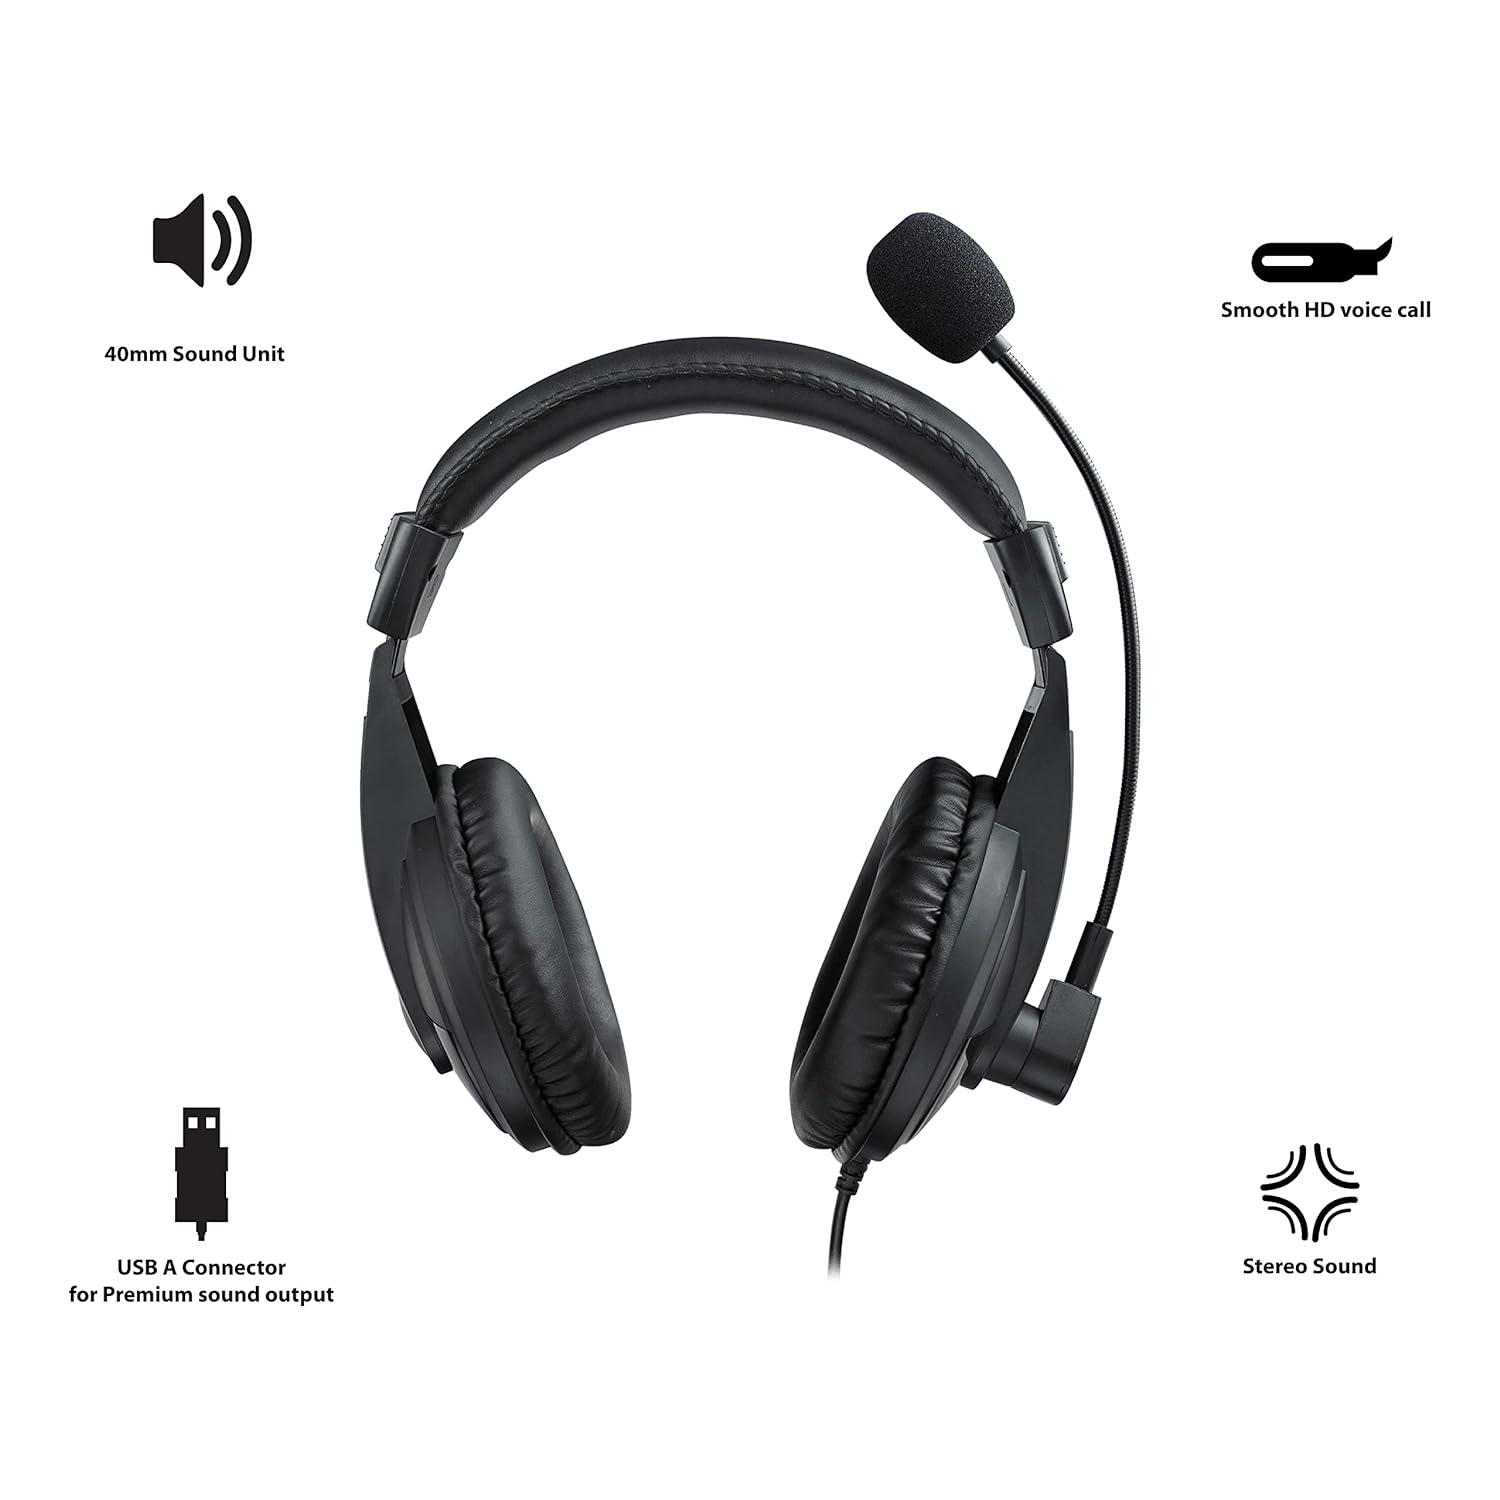 Rapoo H150 Stereo Wired Over Ear Headphones with Microphone Noise-Reduction, USB, Pc/Mac/Laptop/Chrome OS - Black